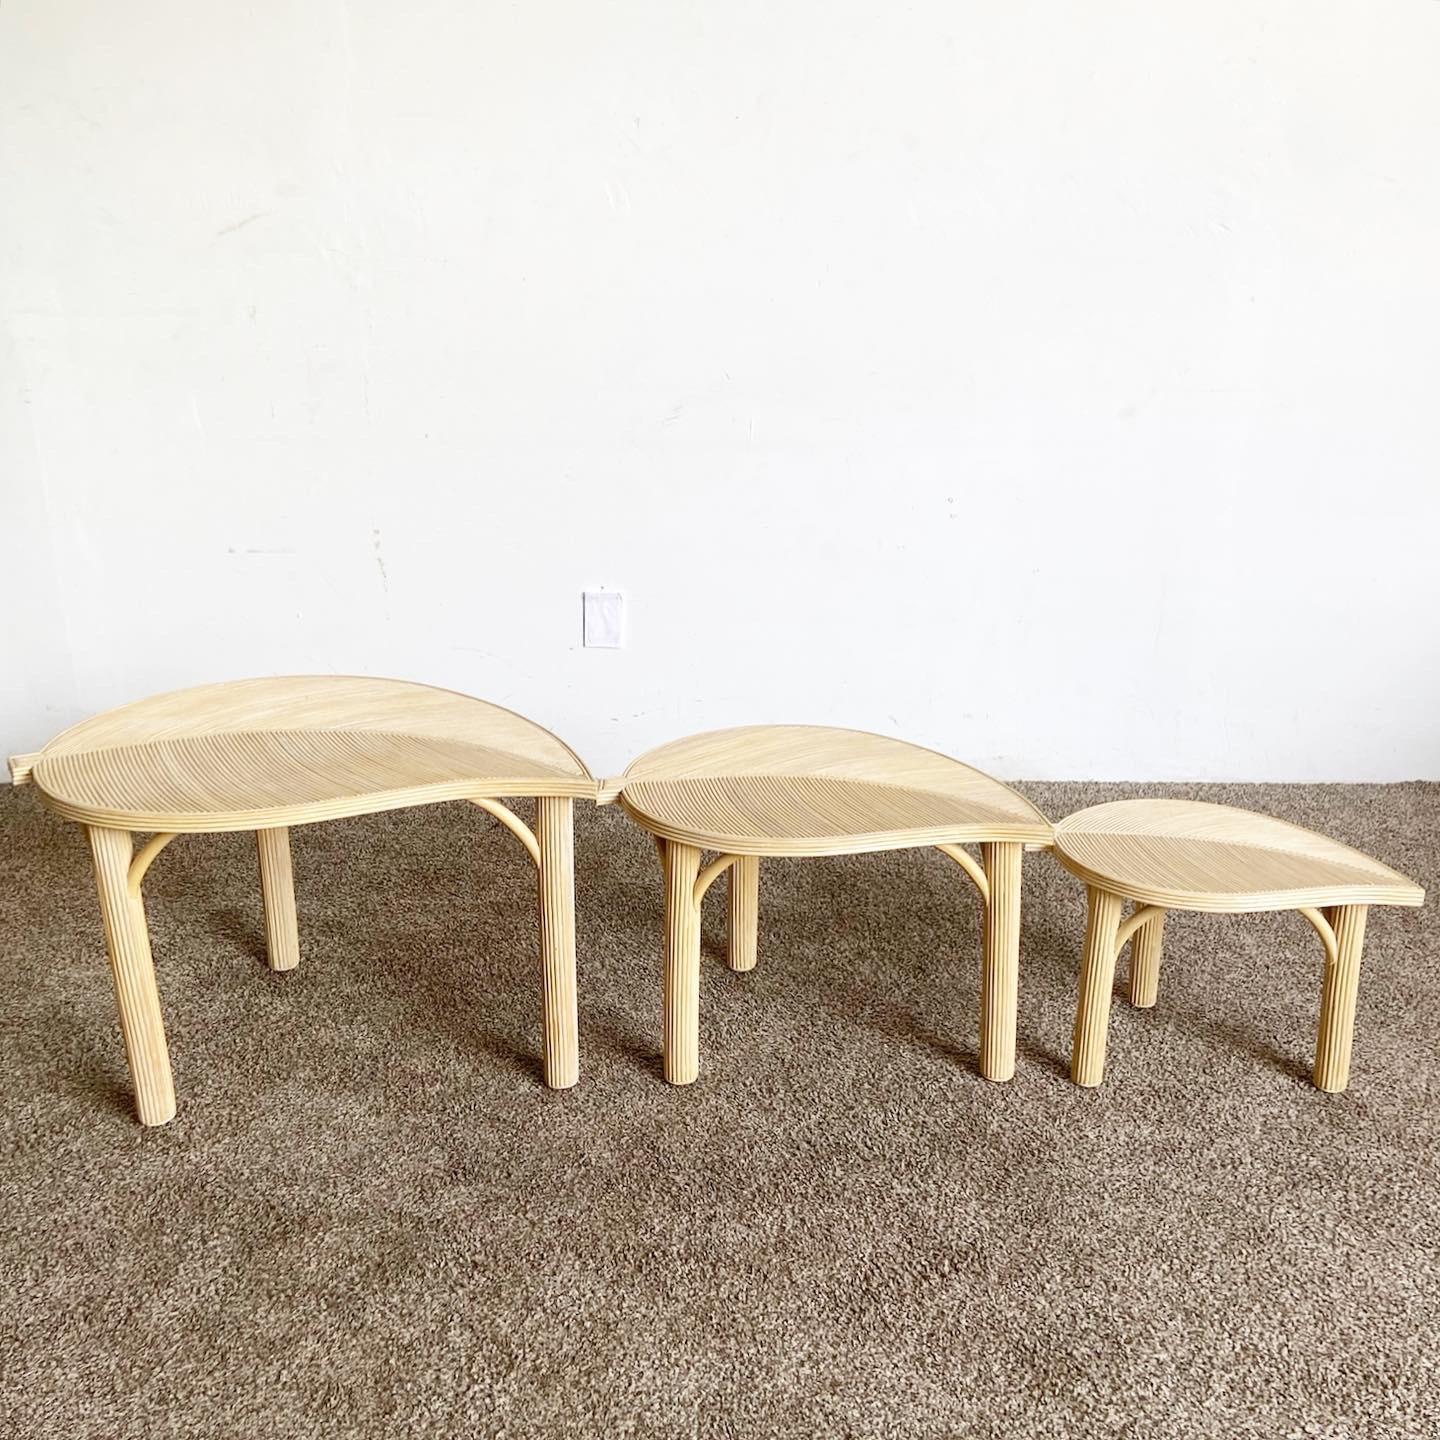 Philippine Boho Chic Pencil Reed Leaf Nesting Tables - Set of 3 For Sale